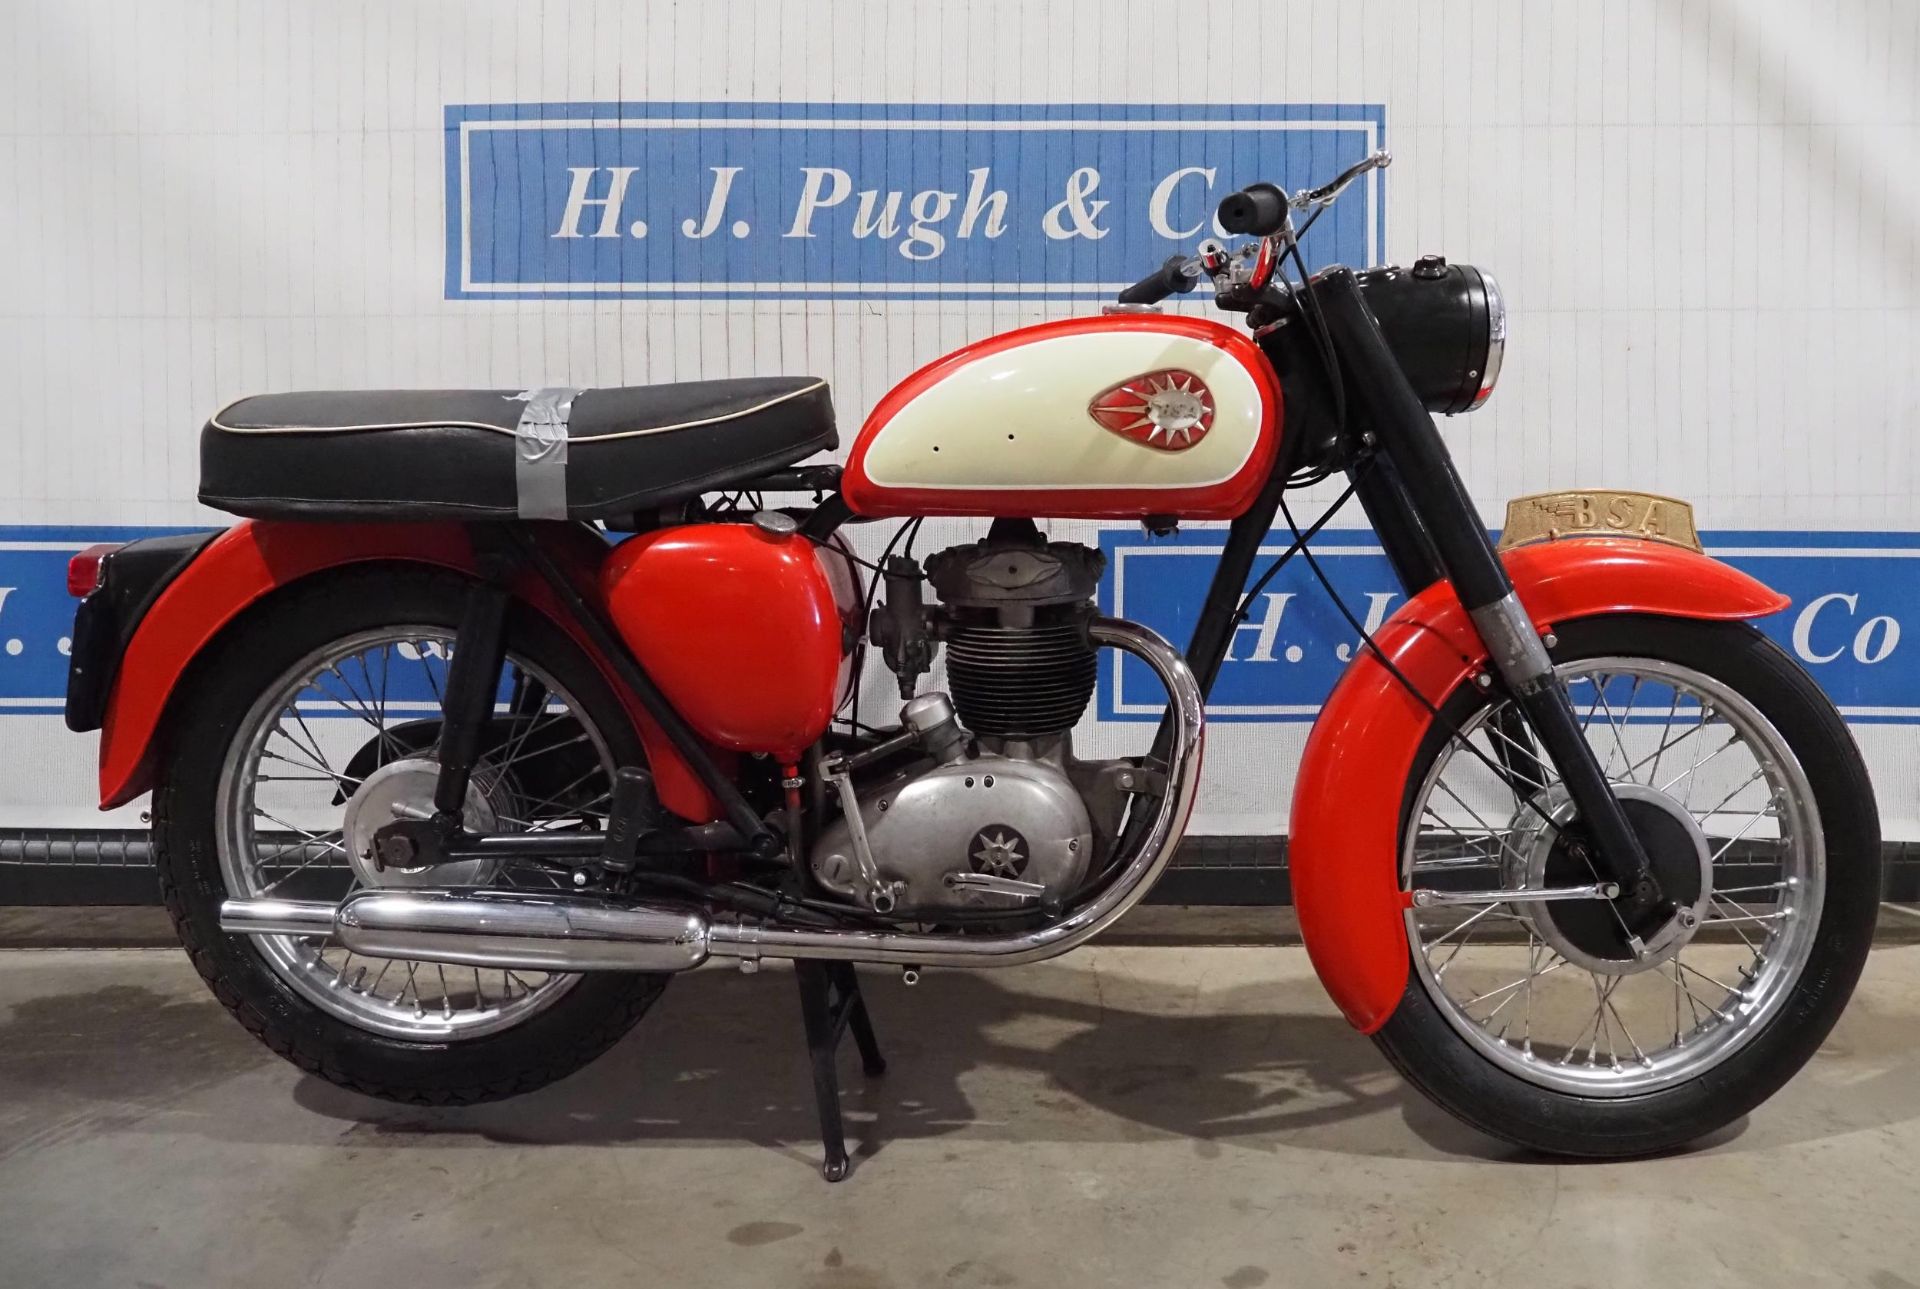 BSA B40 motorcycle. 1961. This bike is 90% compete and just need finishing. Reg. SSL 718. V5